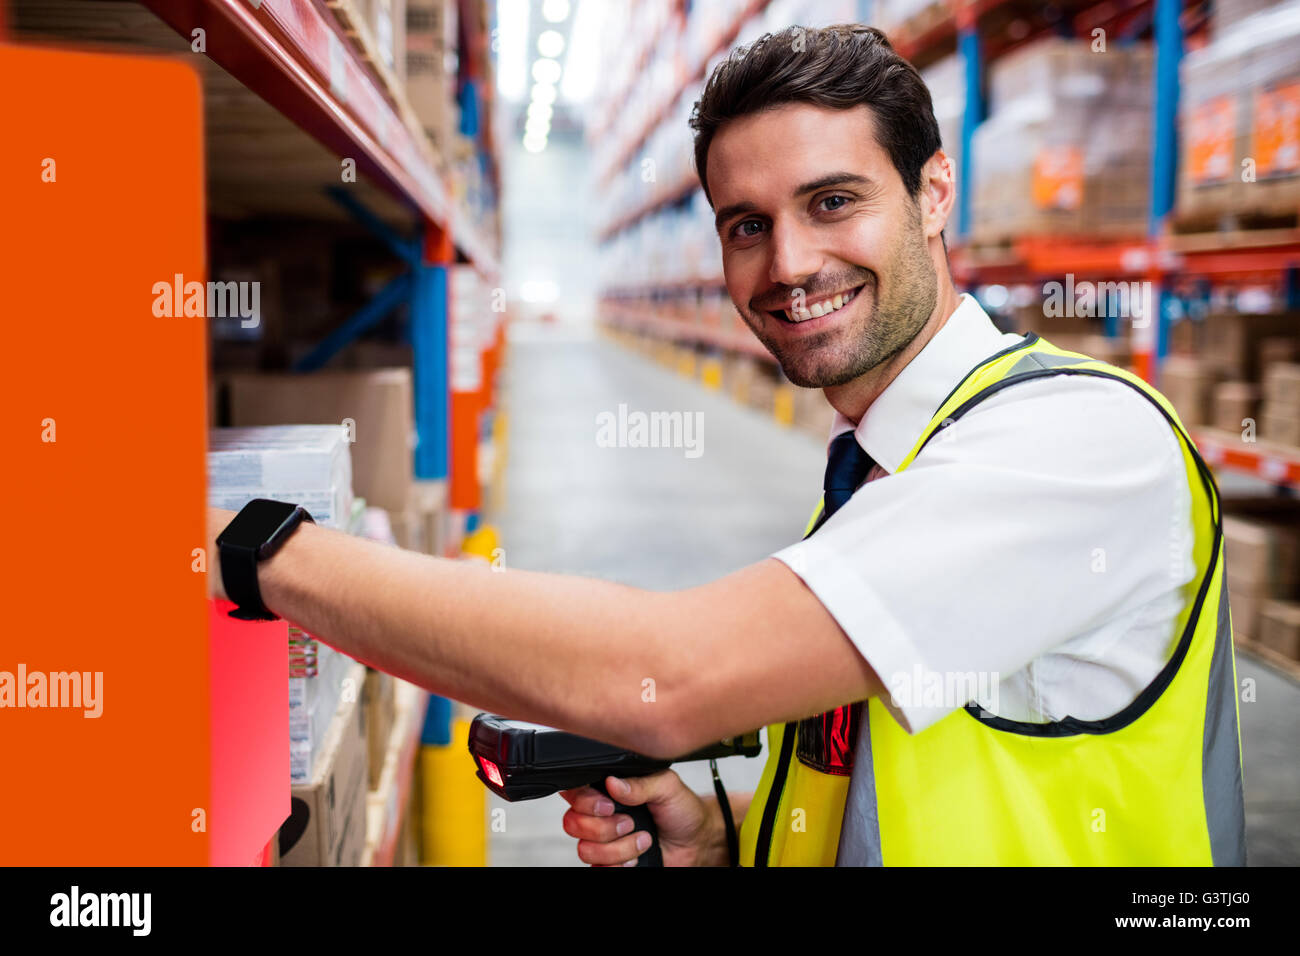 Smiling warehouse manager with yellow coat scanning barcode on box Stock Photo